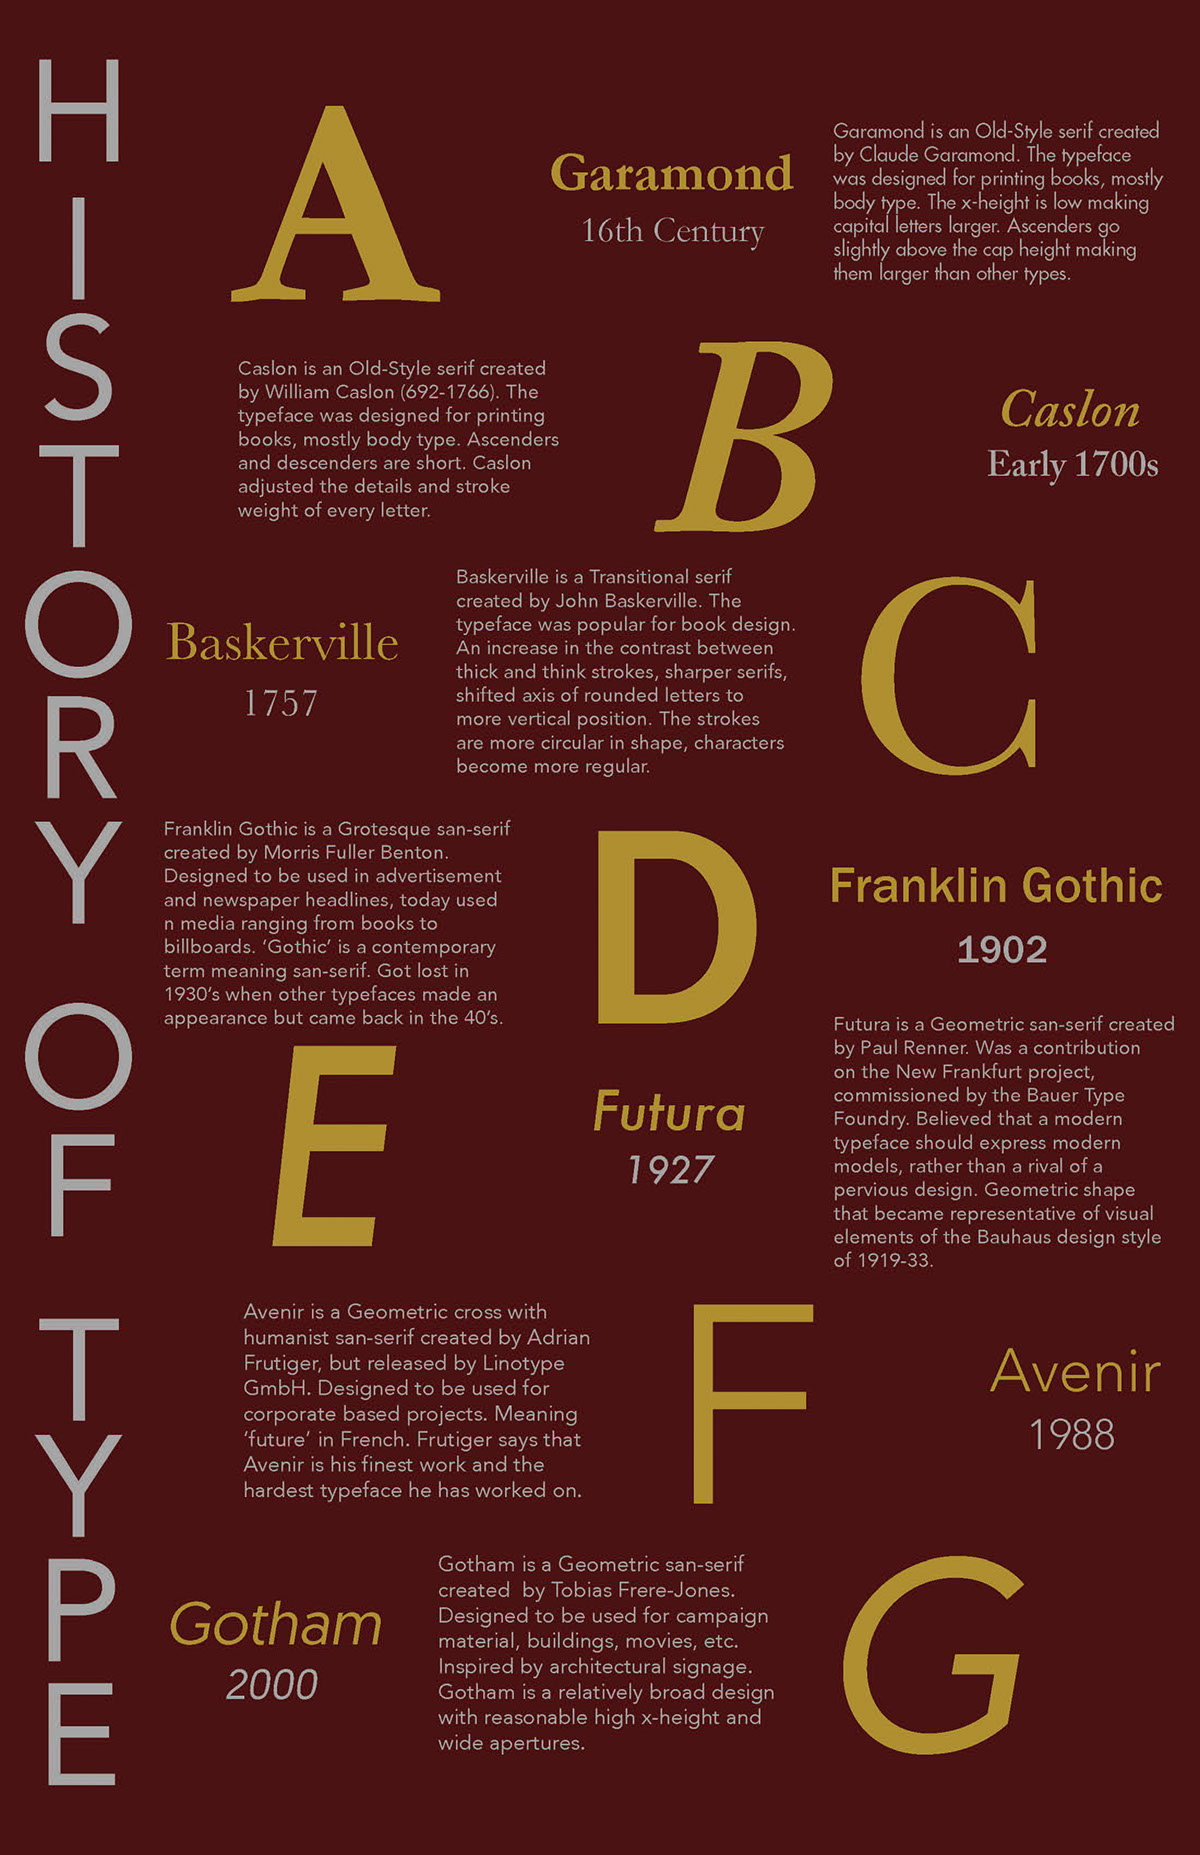 The Visual History of Type. Type history